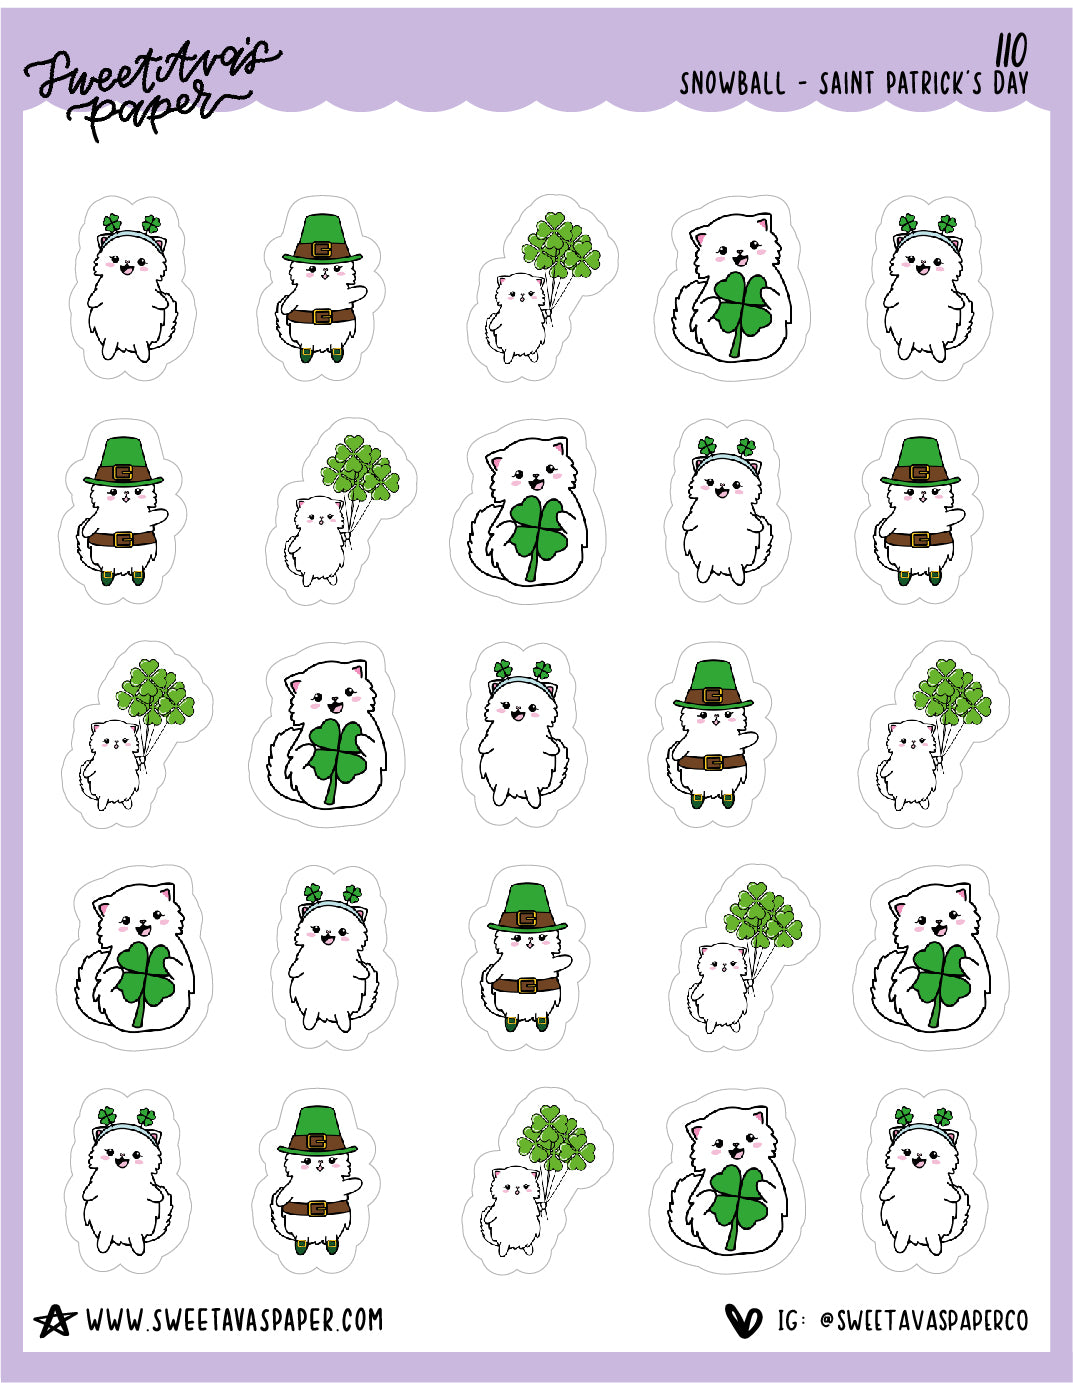 ICON SIZE - Saint Patrick's Day Stickers - Snowball The Cat - [110]